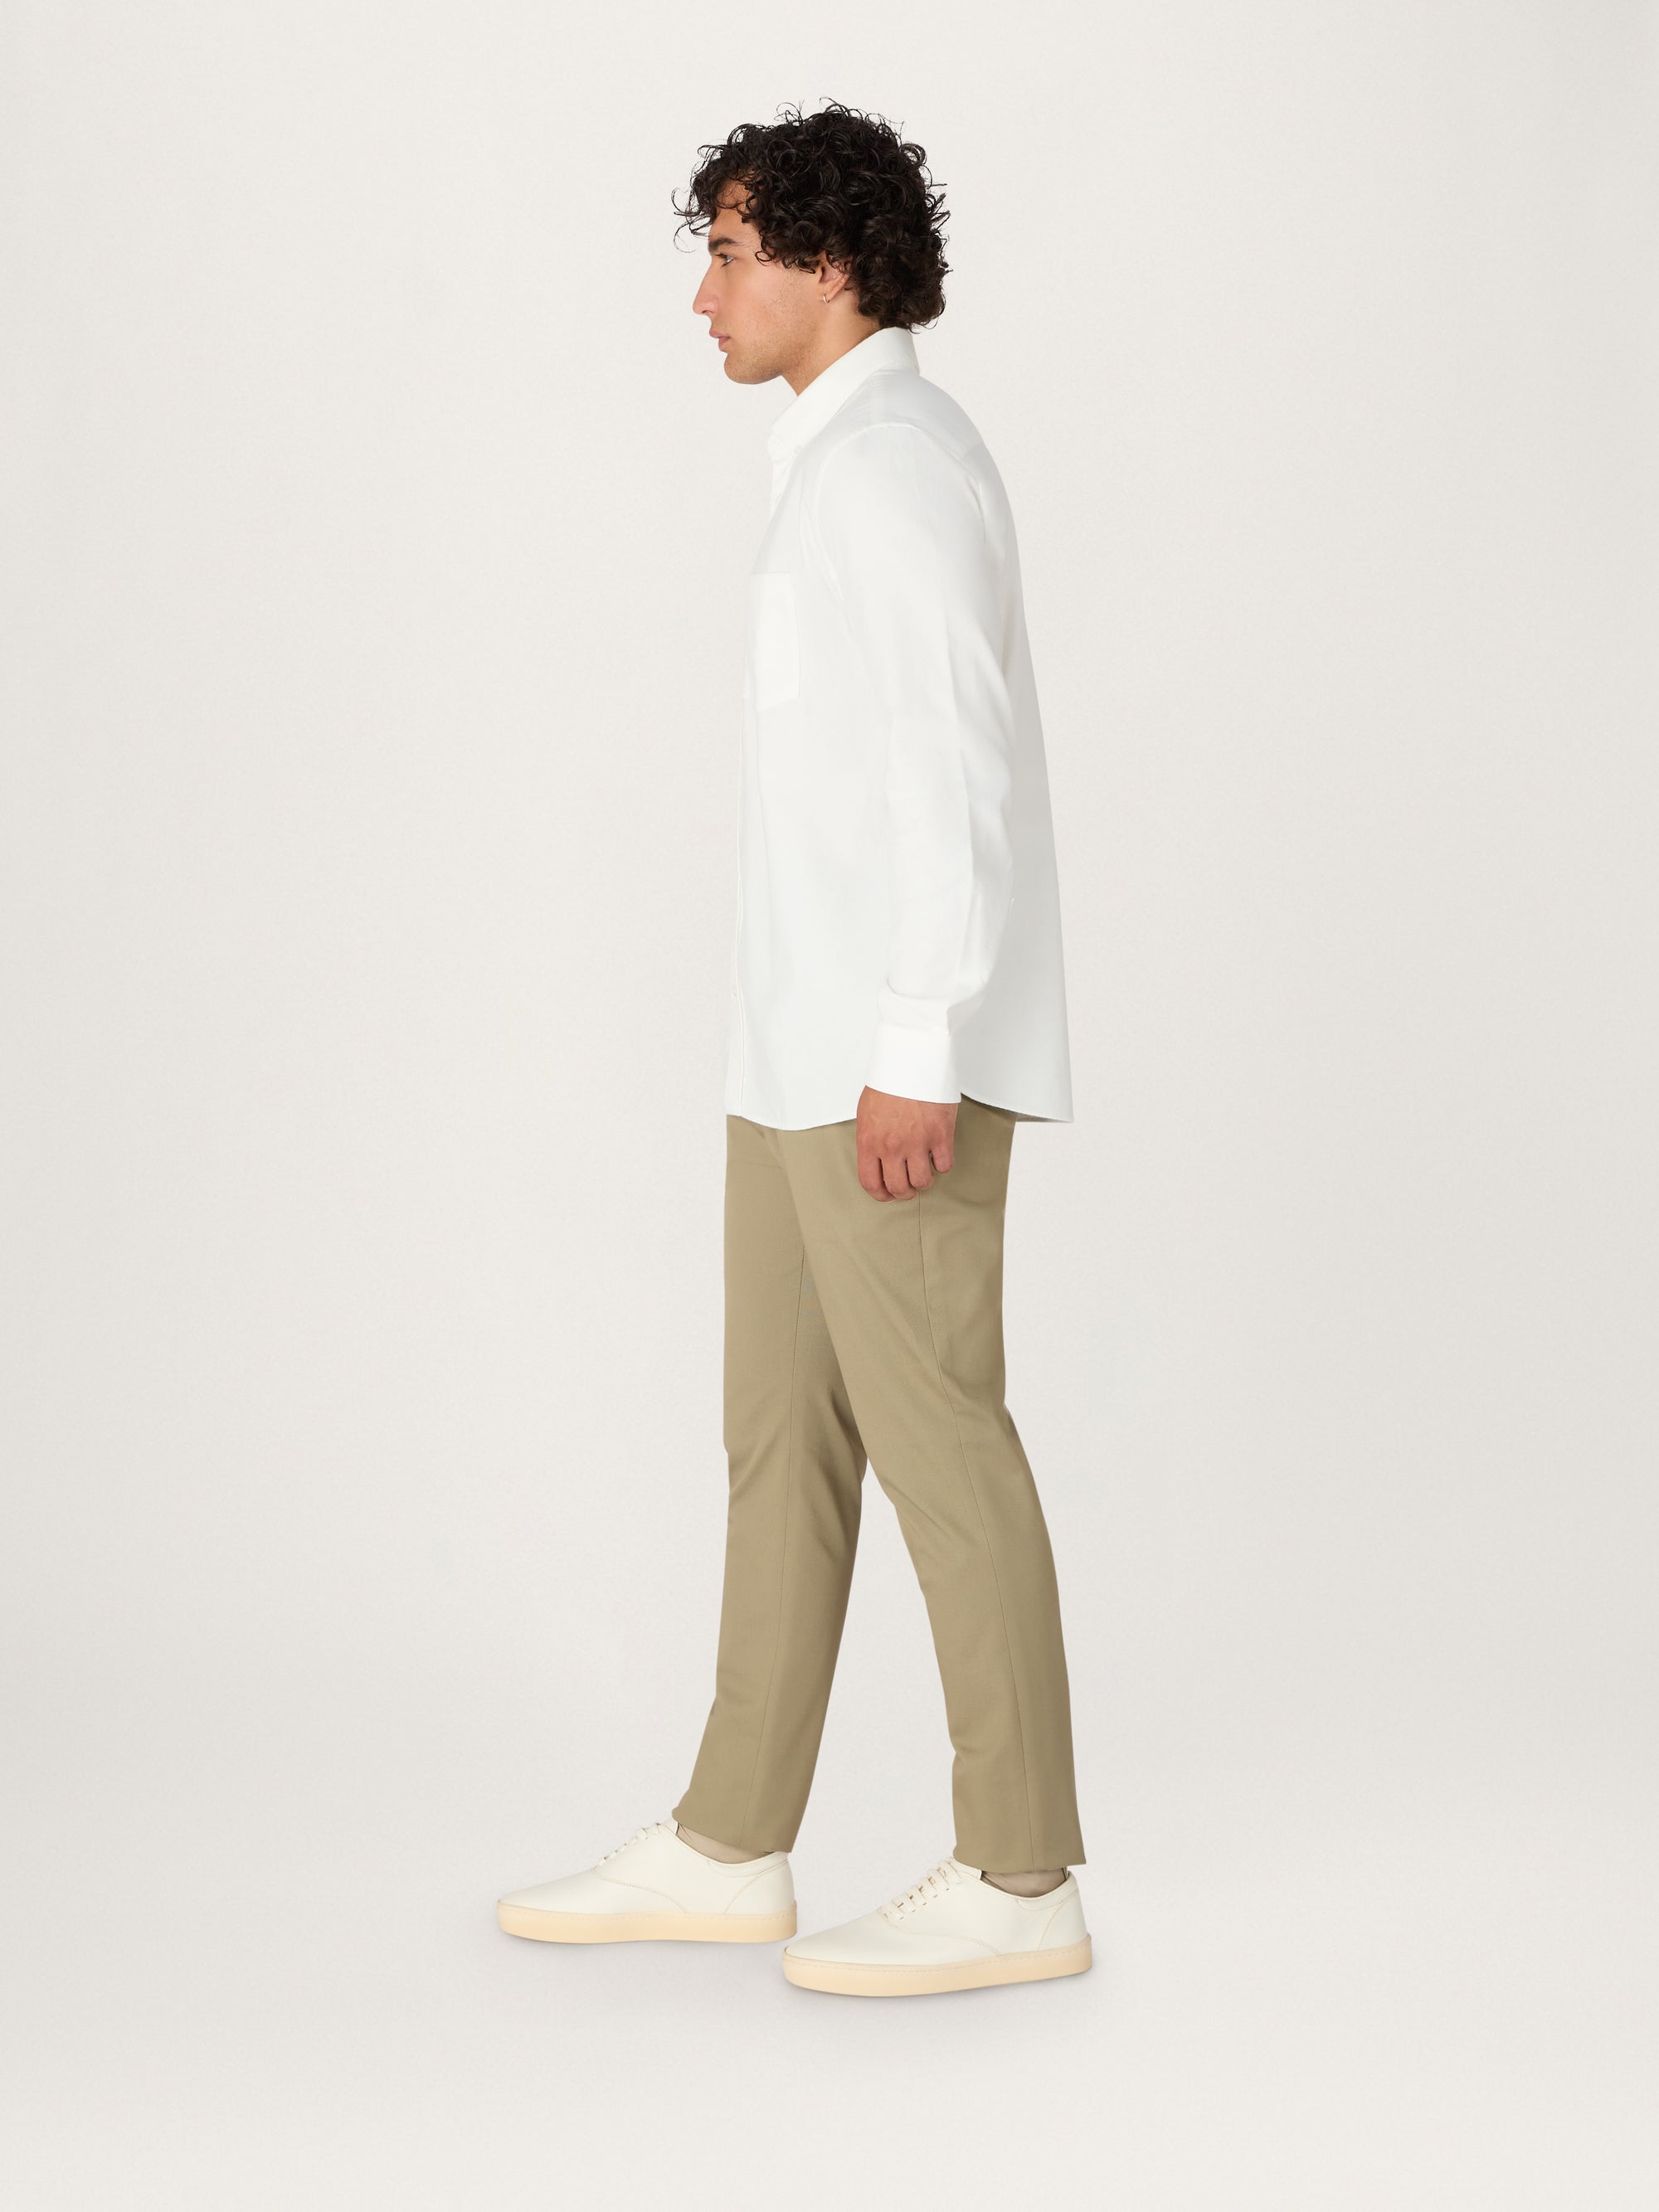 The Easy Shirt || Off White | Organic Cotton